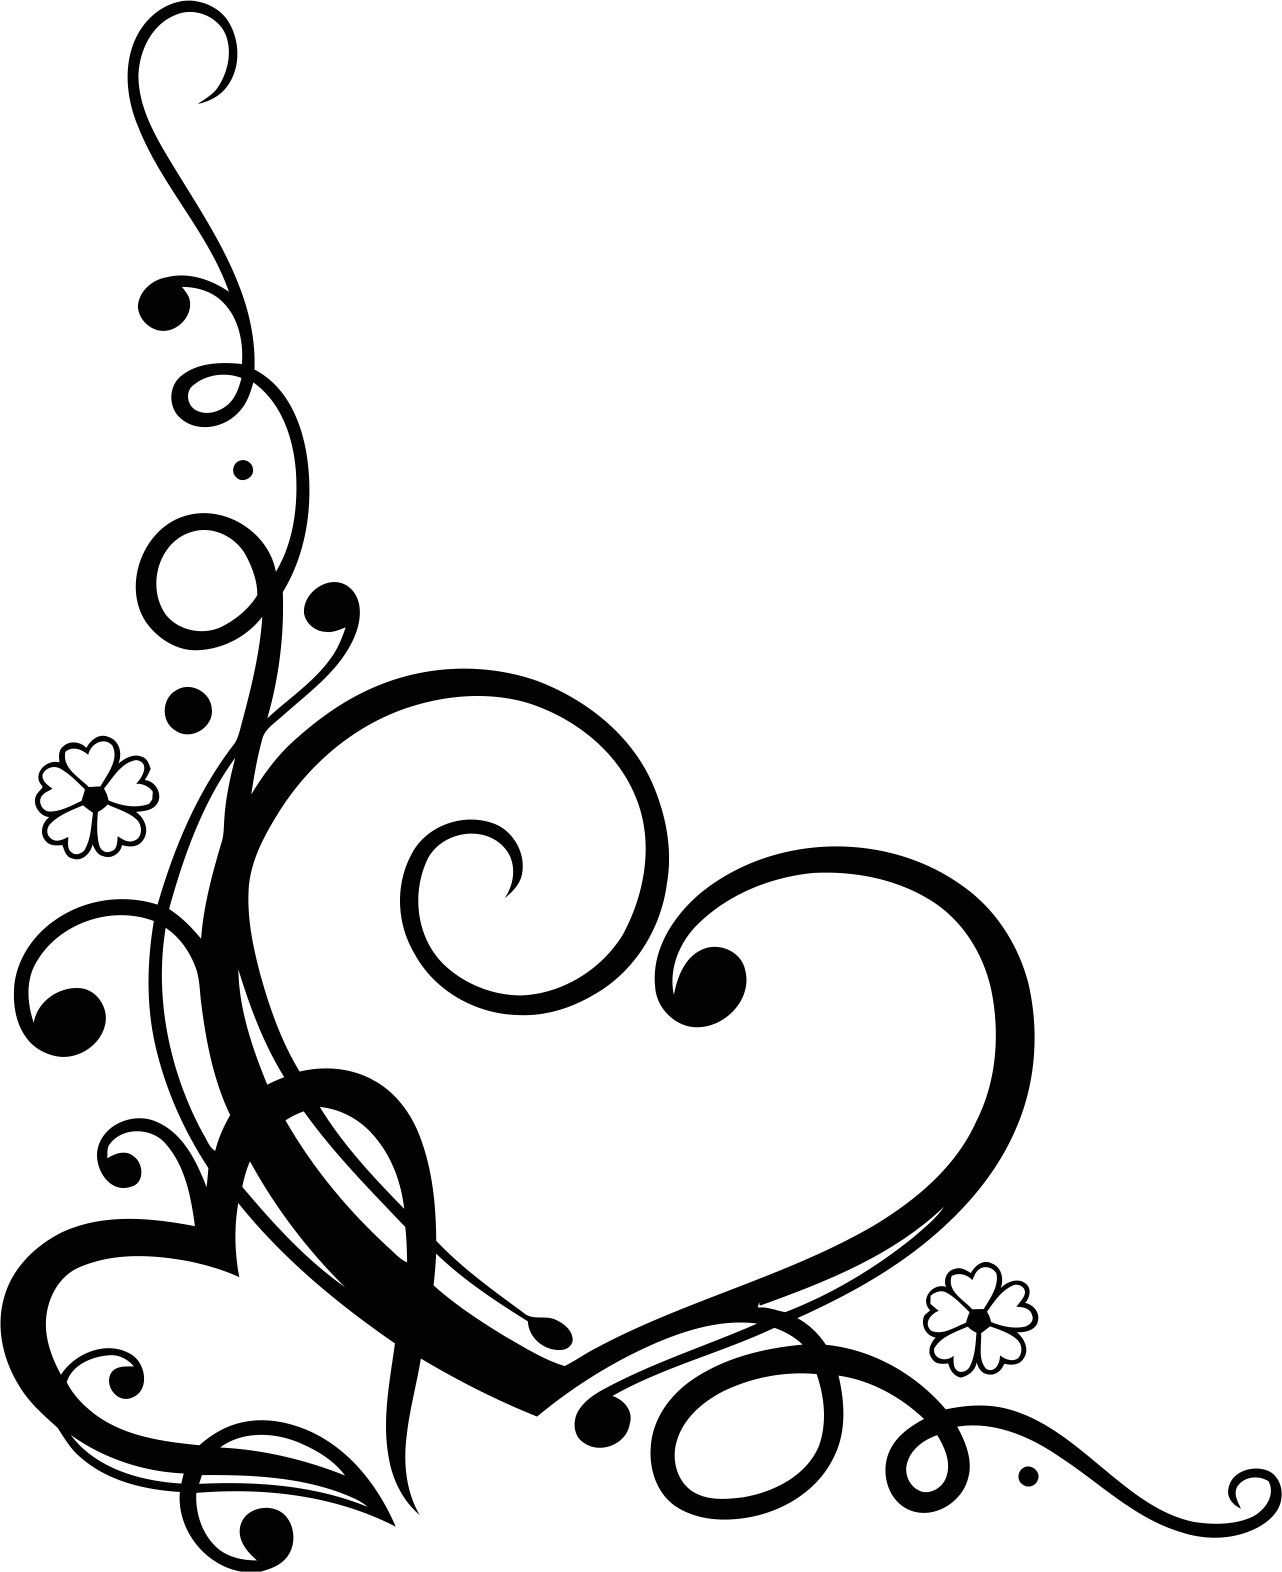 Download Love Heart Floral Vector Free Vector cdr Download - 3axis.co